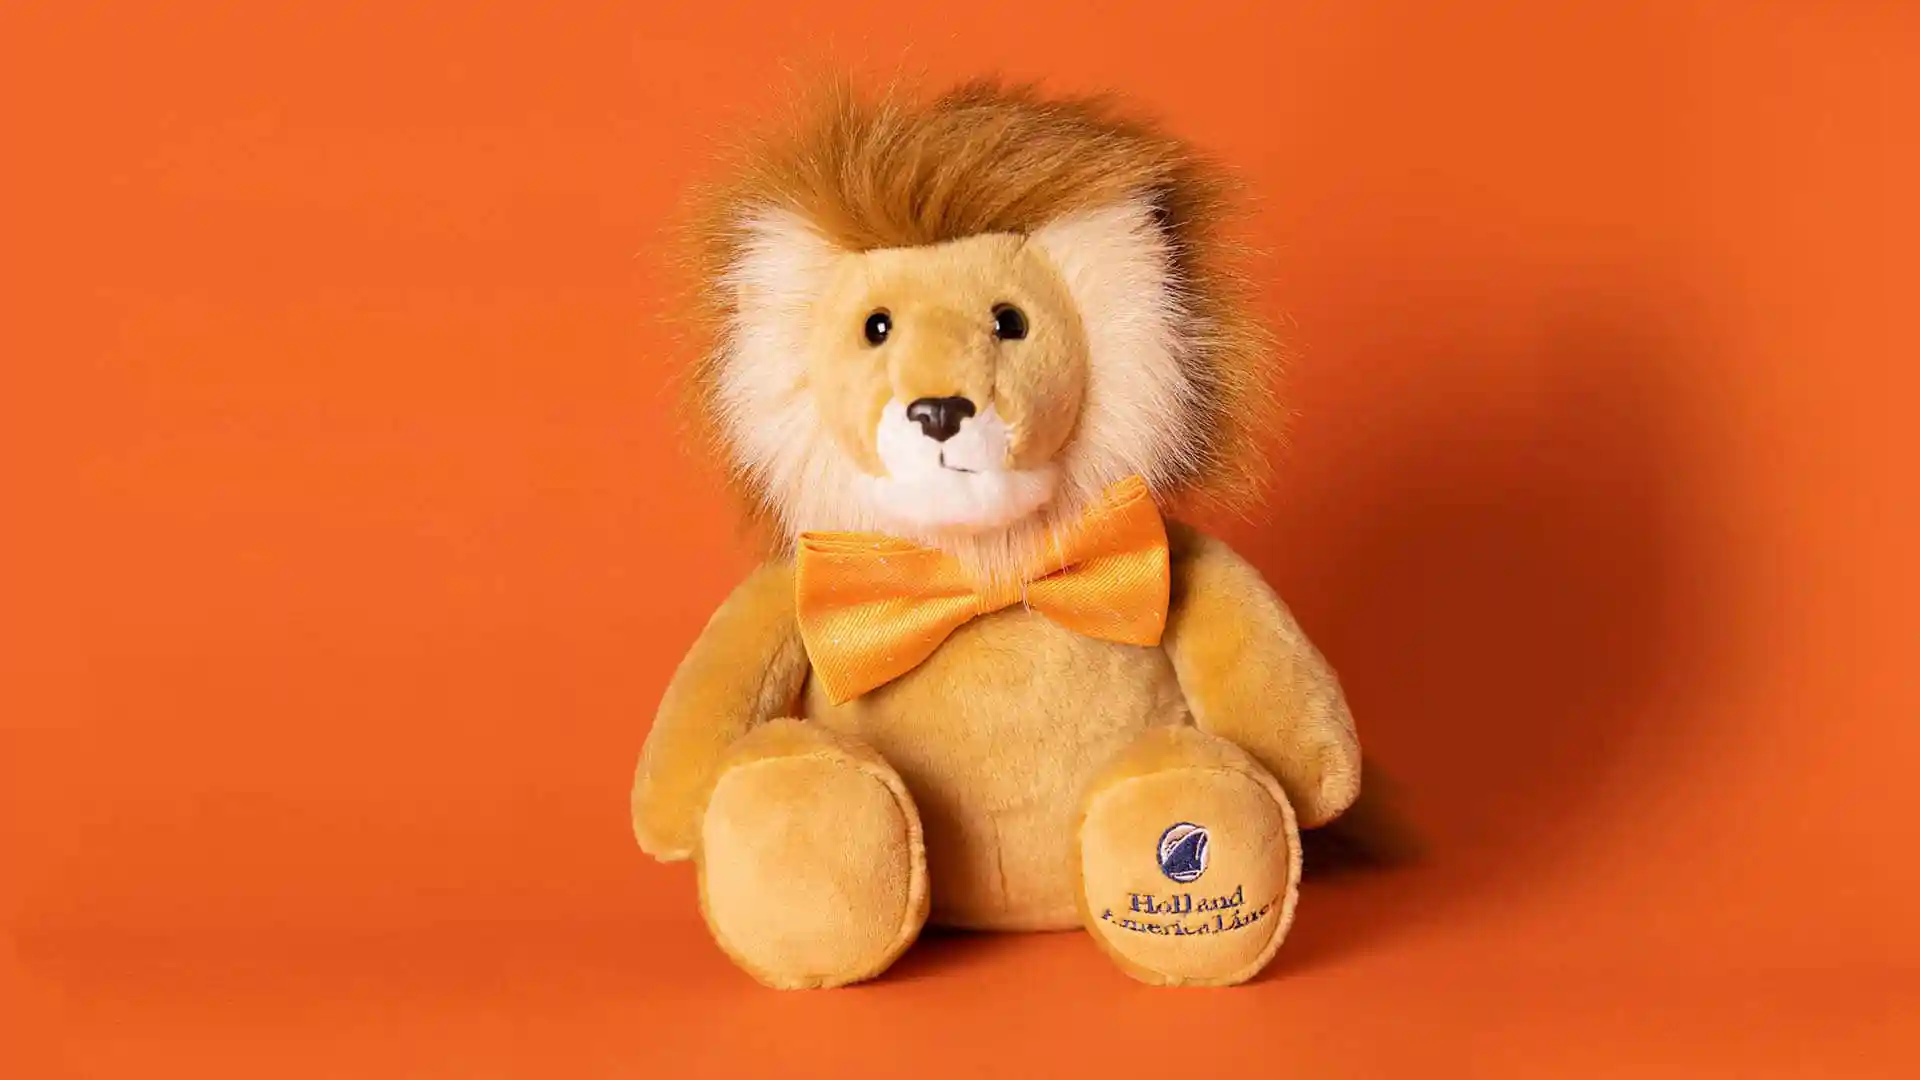 Post: Our New Mascot, Lewie the Lion, Makes His Debut on King’s Day